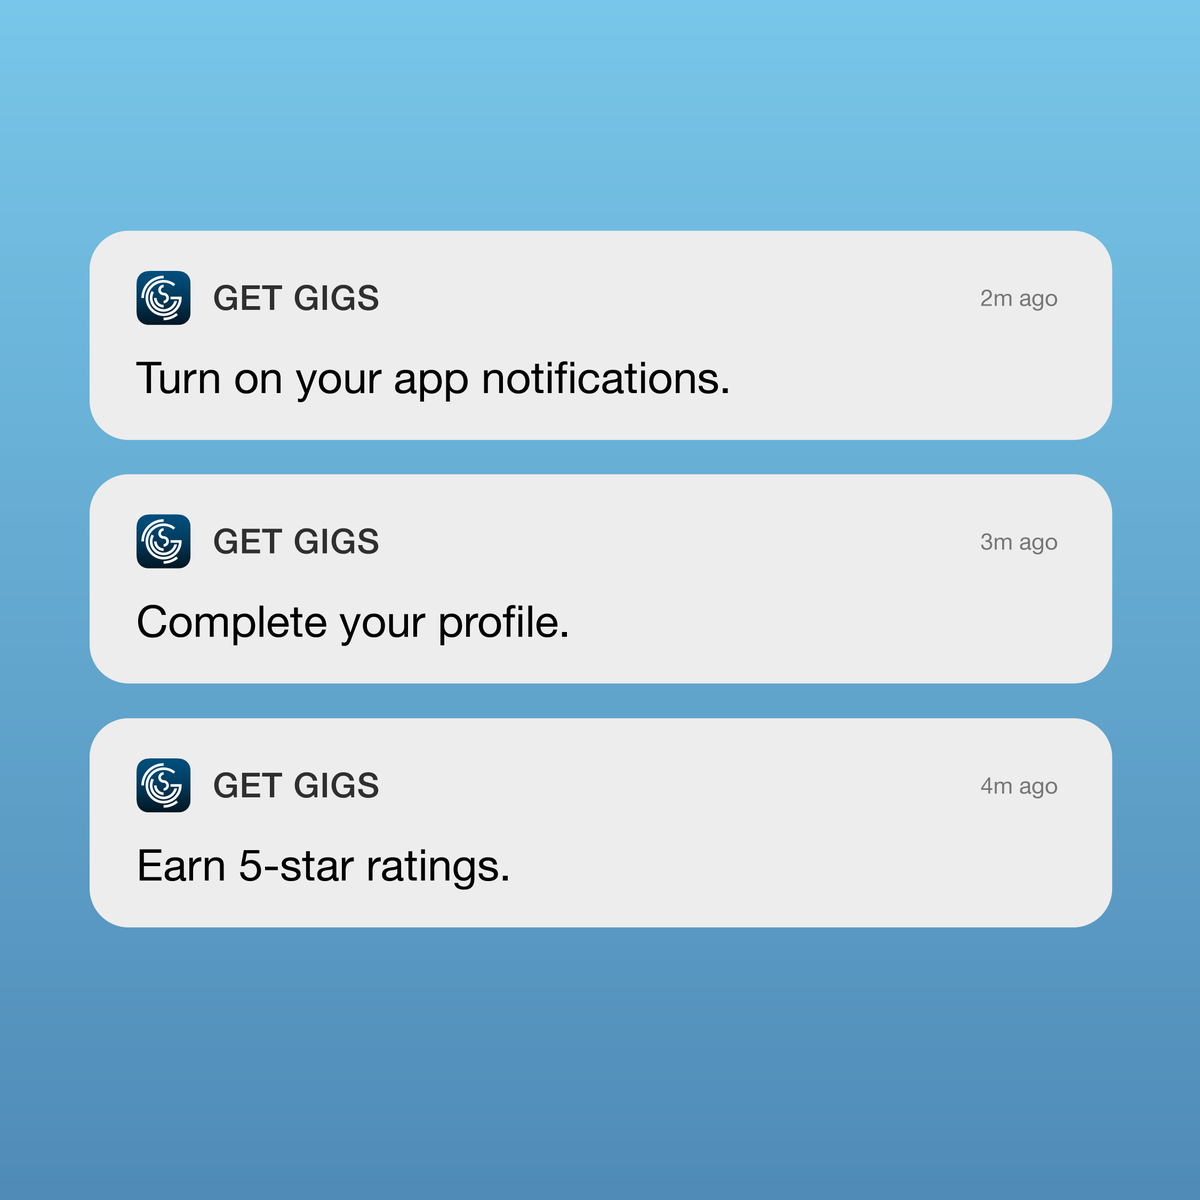 GigSmart Get Gigs tips for increasing your income: Turn on your app notifications, complete your profile, earn 5-star ratings. Haven’t downloaded the Get Gigs app yet? Link in bio.